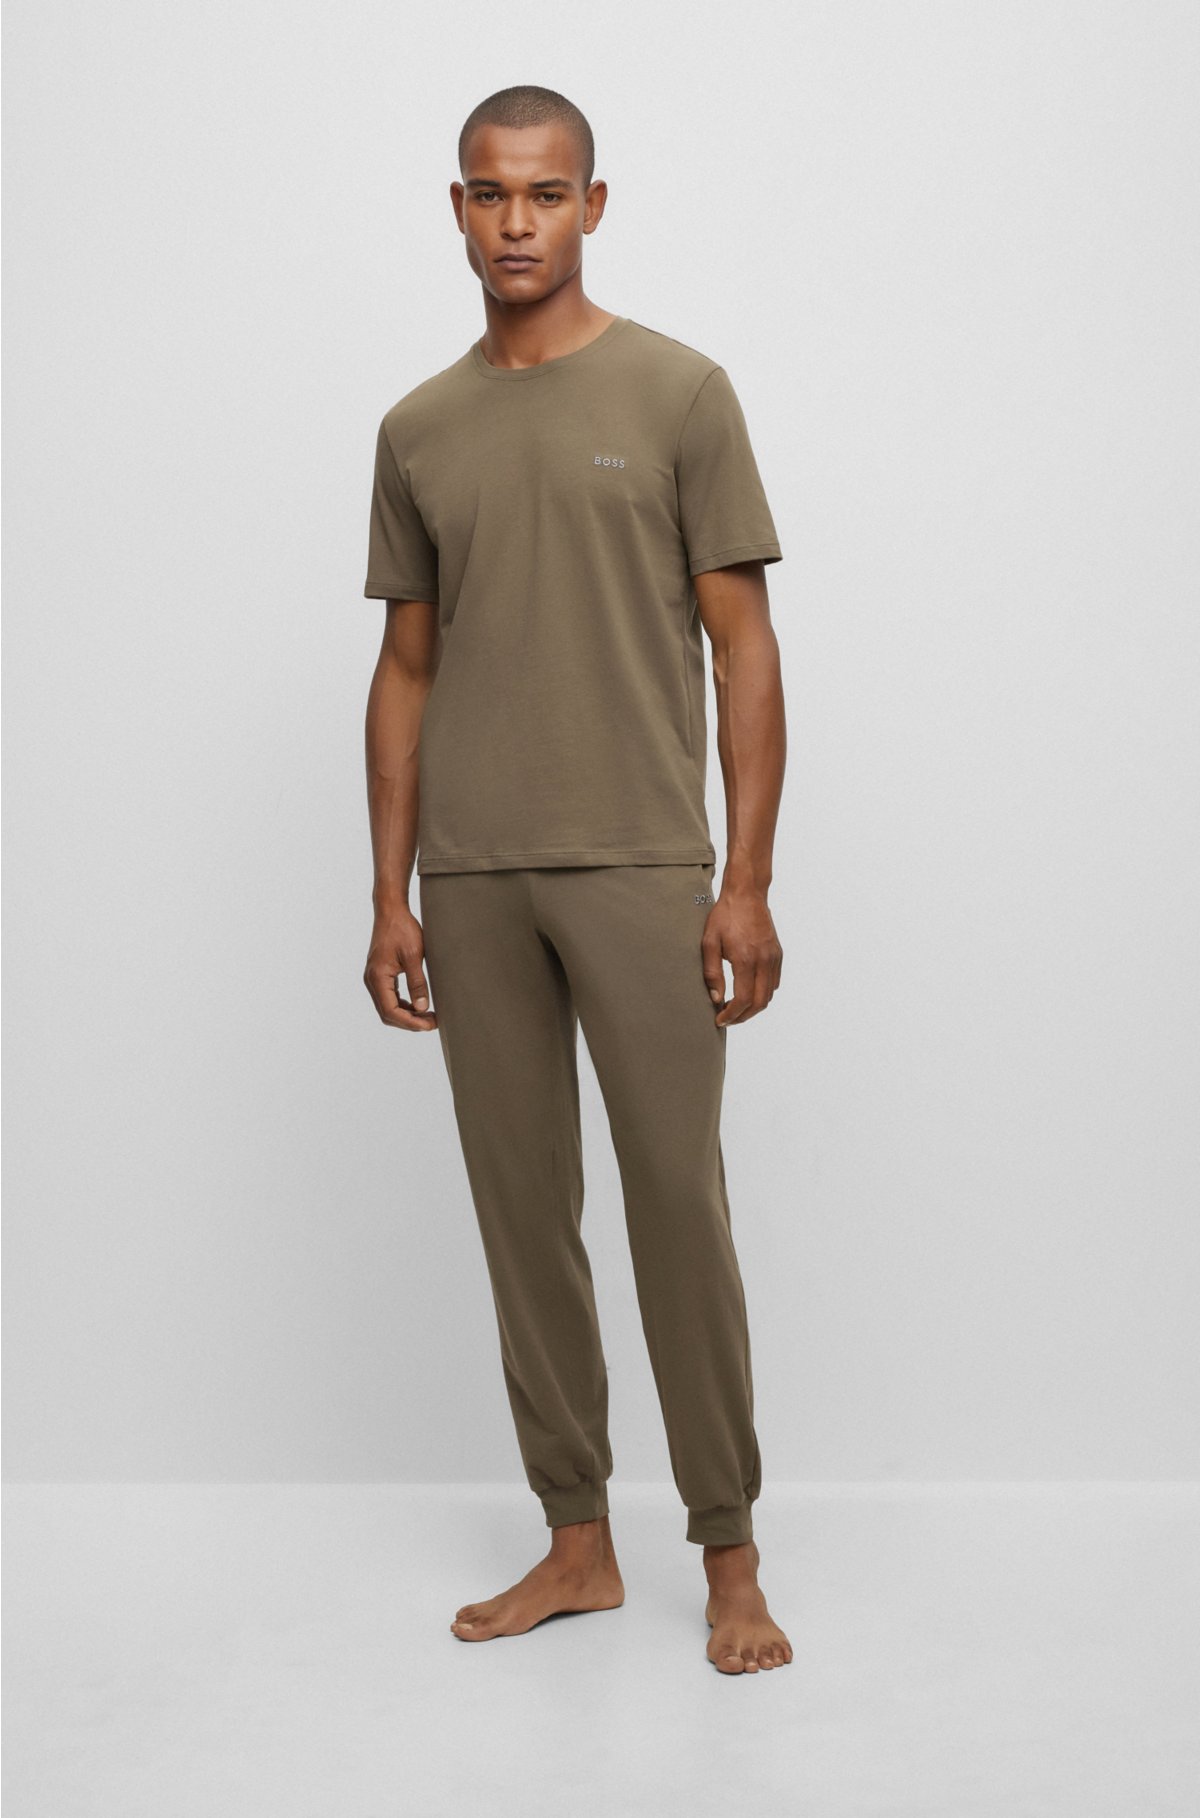 Loungewear T-shirt in stretch cotton with contrast logo, Khaki